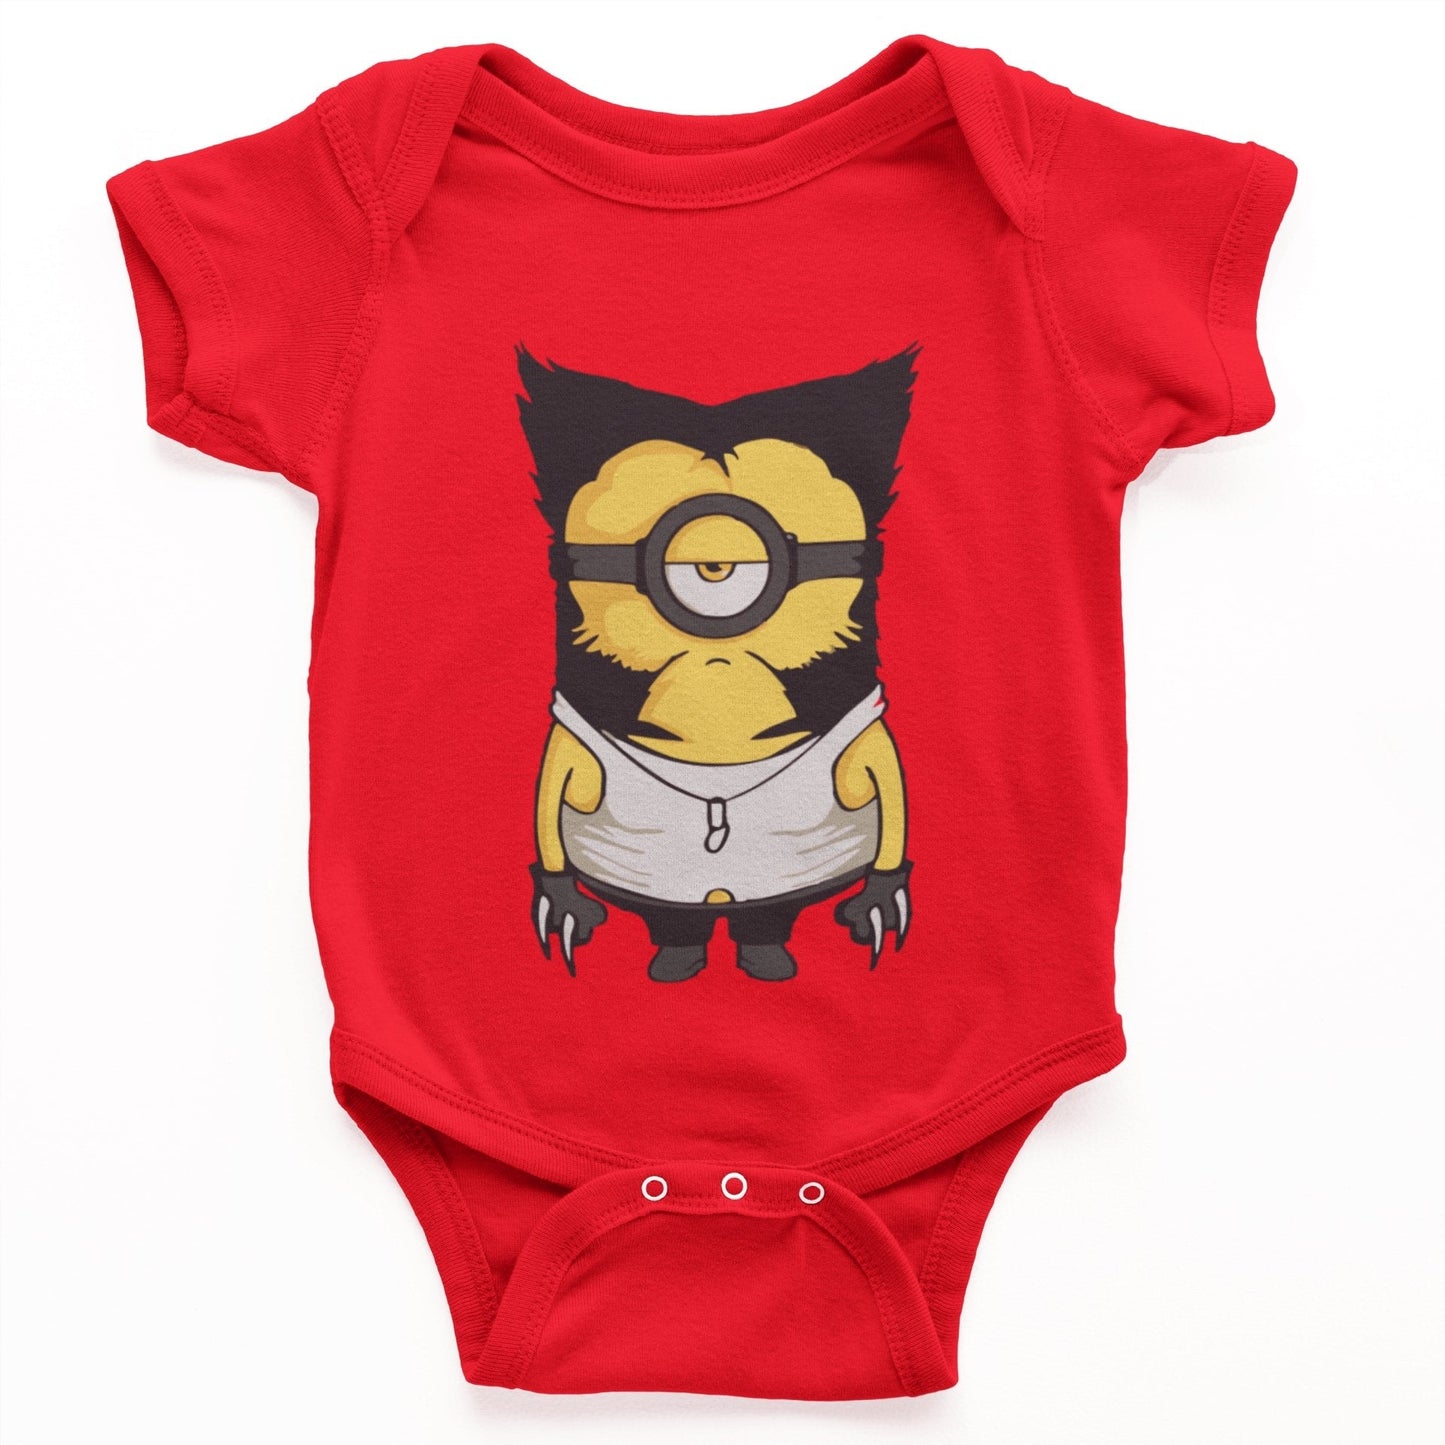 thelegalgang,Minion Wolverine Graphic Onesies for Babies,.